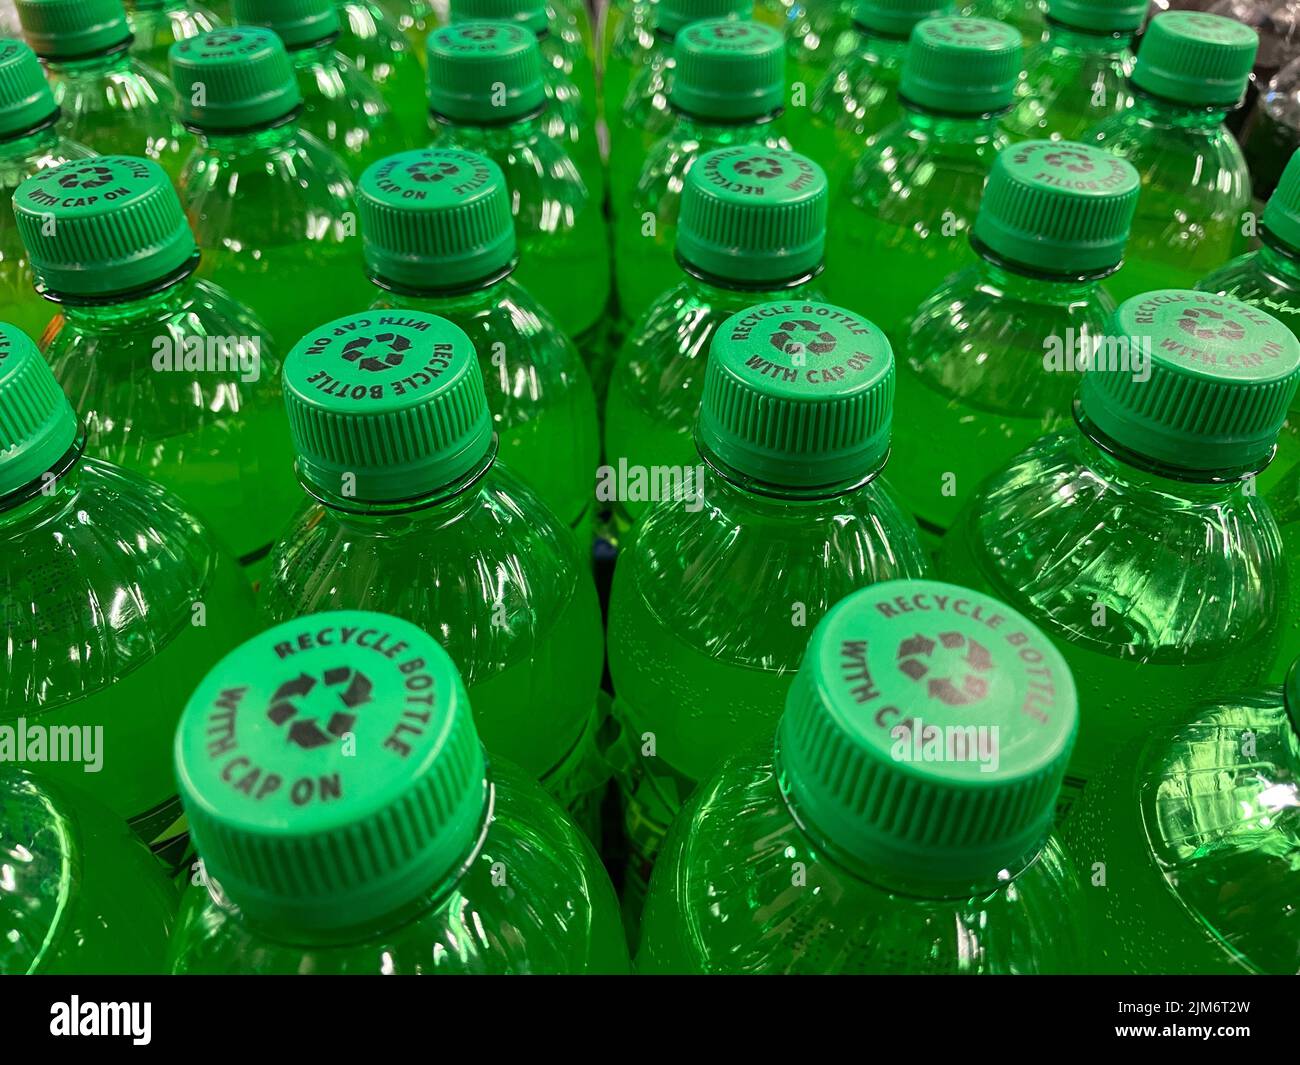 Grovetown, Ga USA - 12 21 21: Retail grocery store green bottle tops looking on Stock Photo